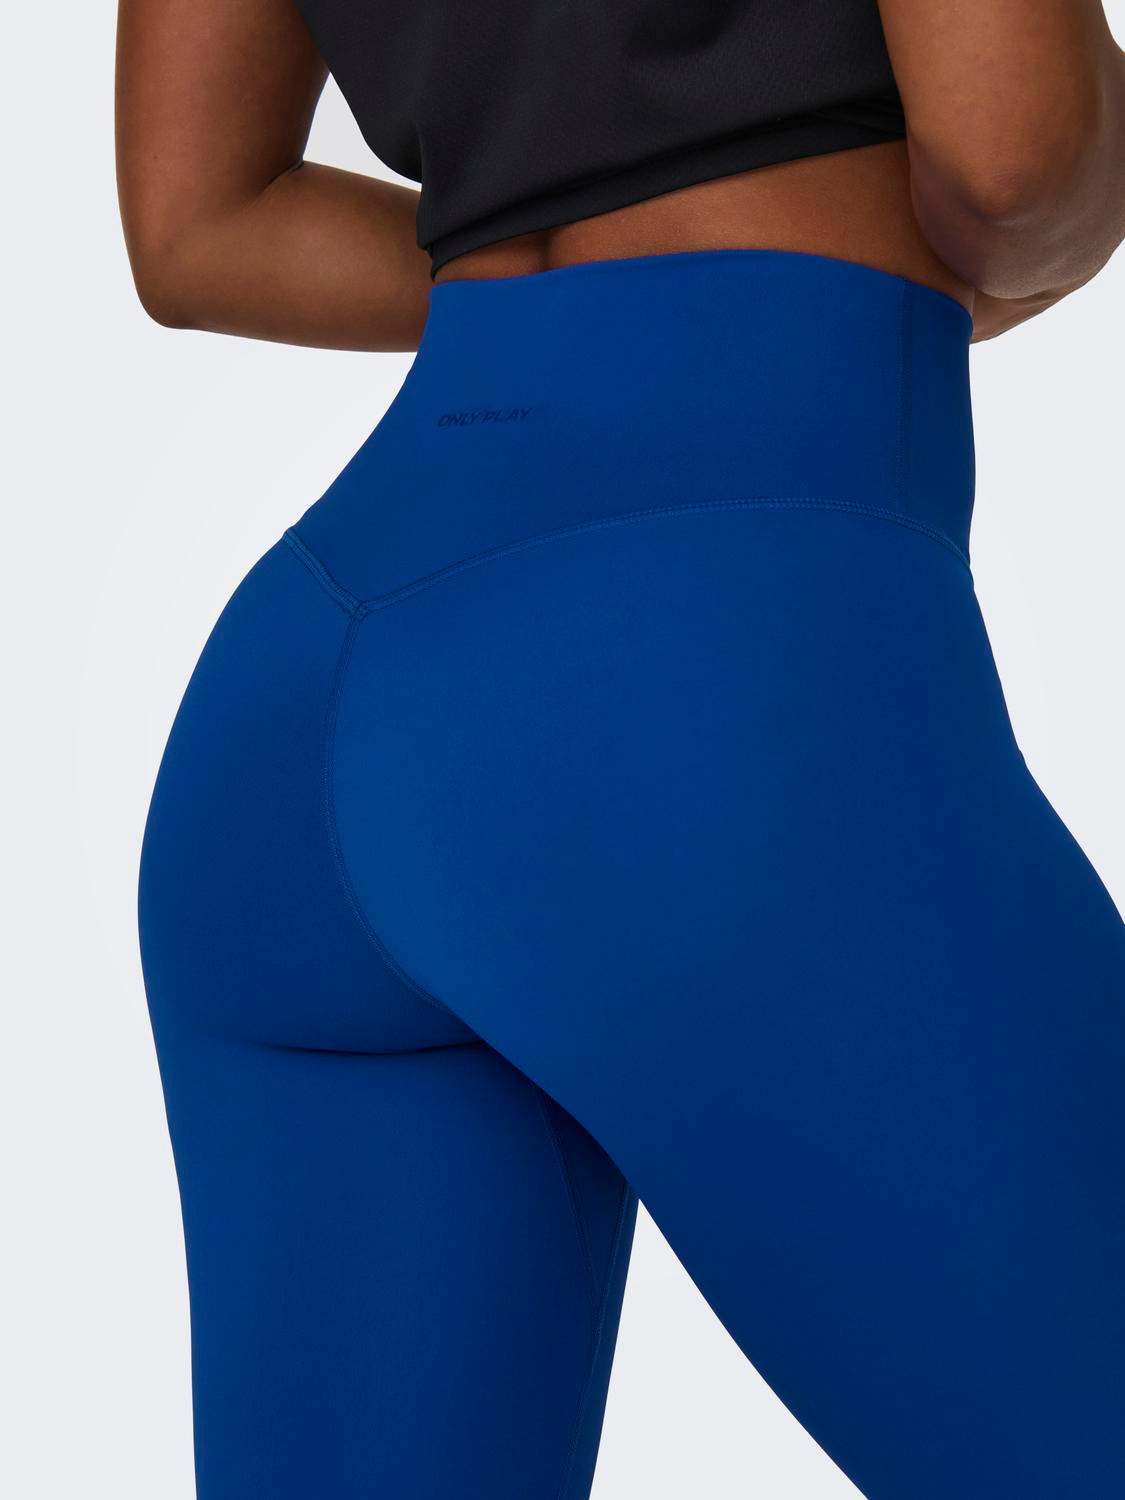 ONLY Tight fit Super-high waist Legging -Surf the Web - 15303178